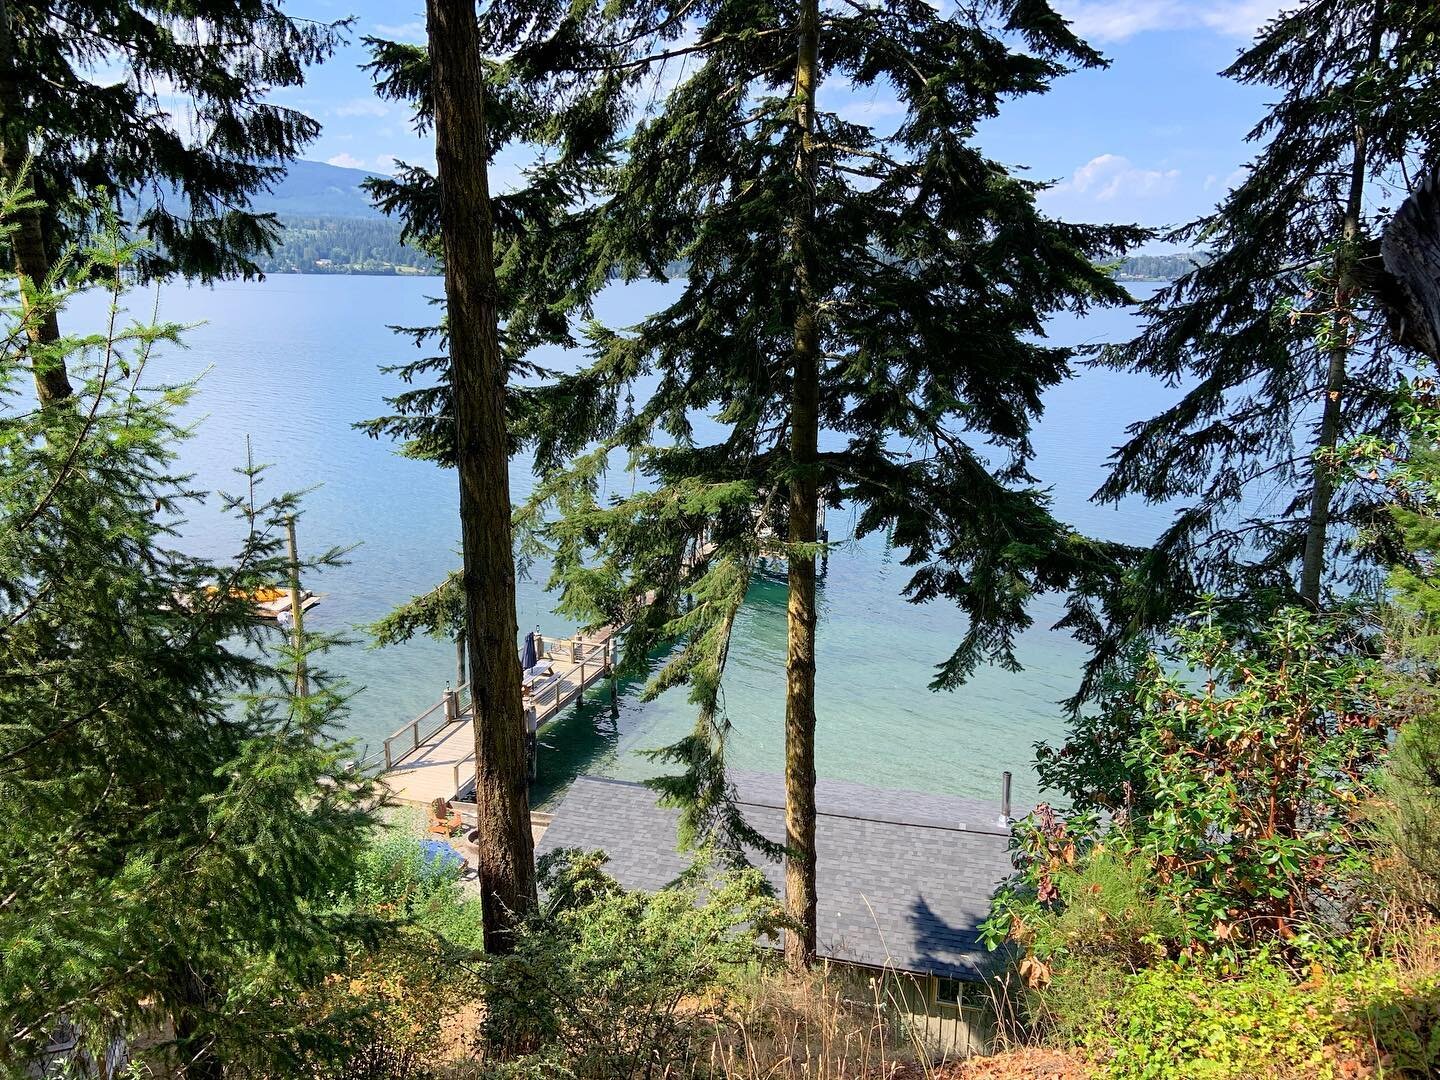 This water today is gorgeous 😎 The view from the TREE HOUSE can be yours!  Available Oct 3rd!  Book now at Sunsetmarineresort.com/treehouse 
.
.
.

#sequimwa
#sequim  #sequimwashington #sequimbay #sequimairbnb #bestairbnb #airbnbsequim #sunsetmarine